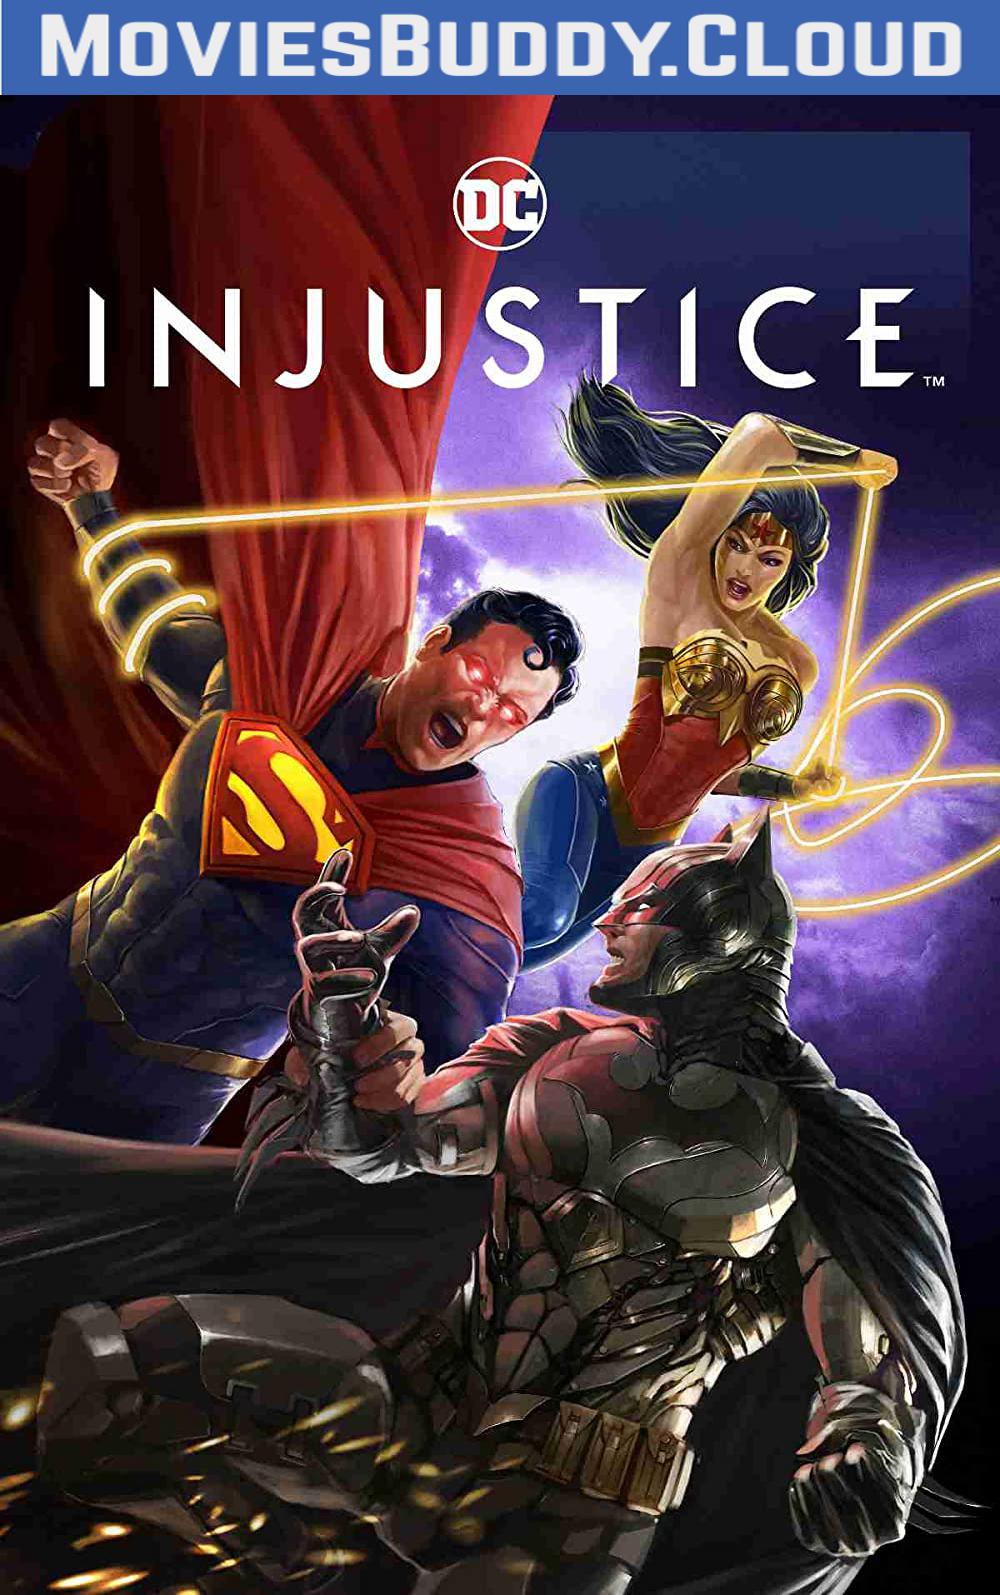 Free Download Injustice Full Movie